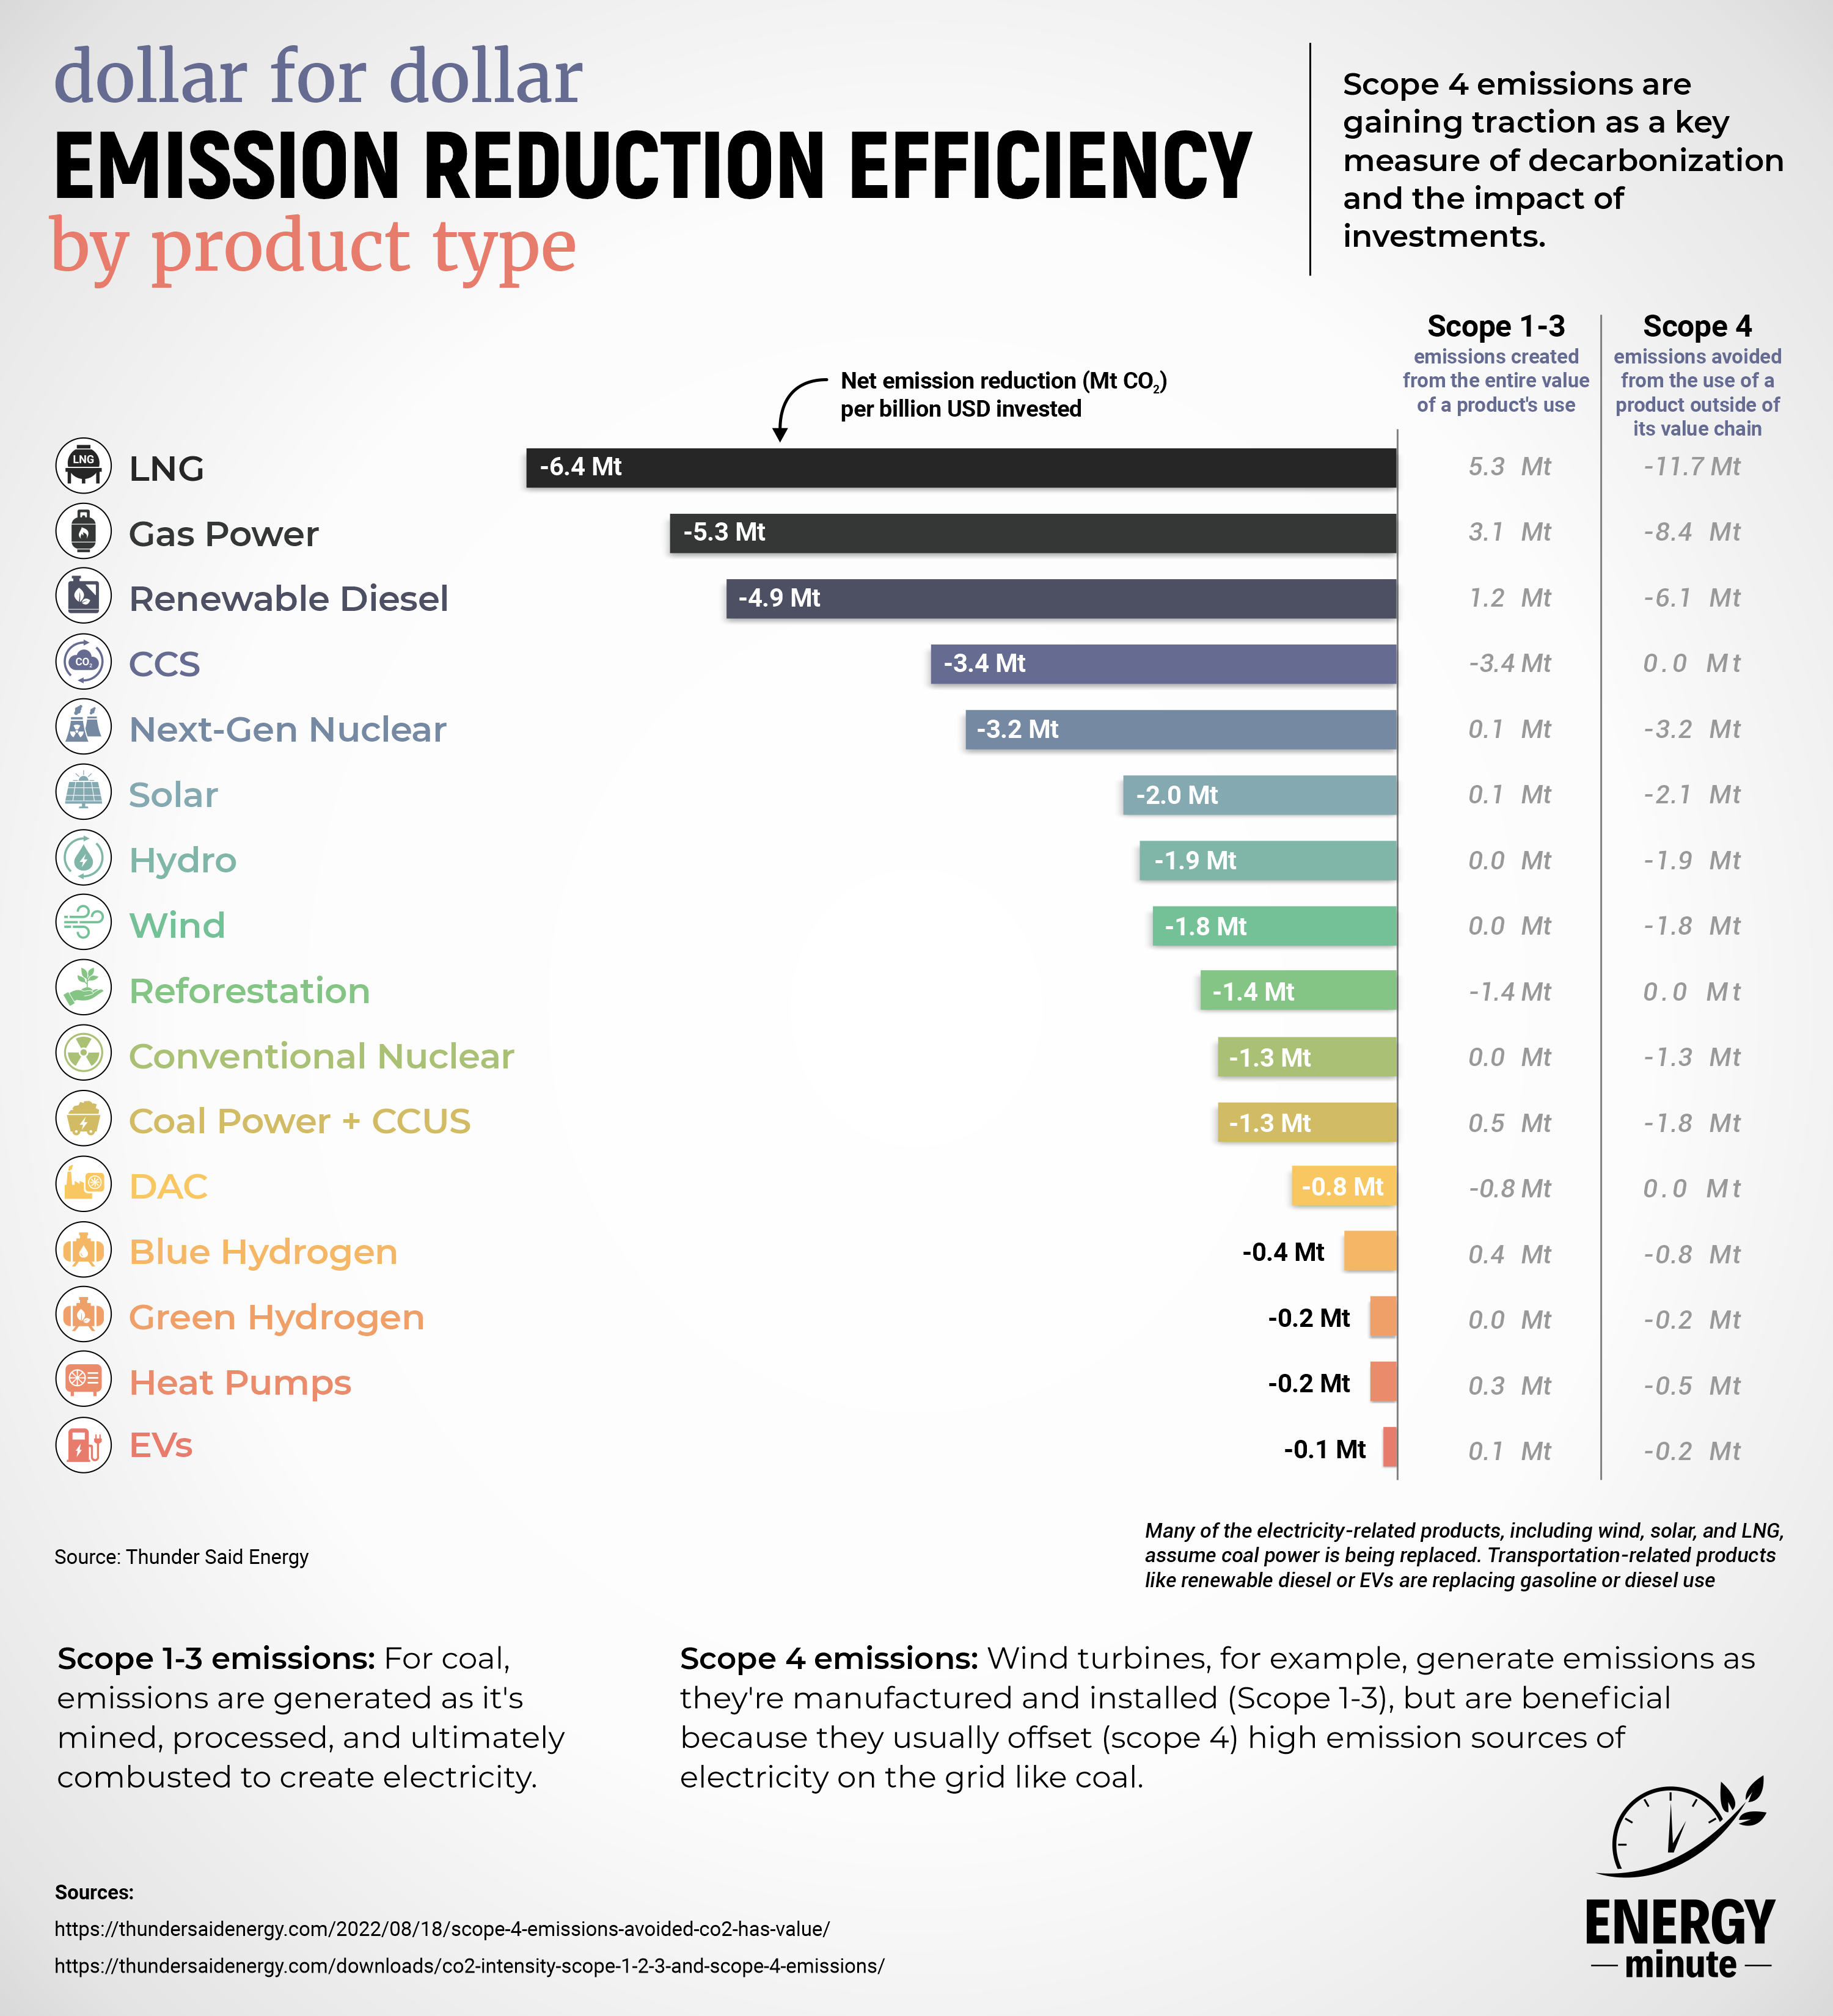 Avoided Emissions by Product